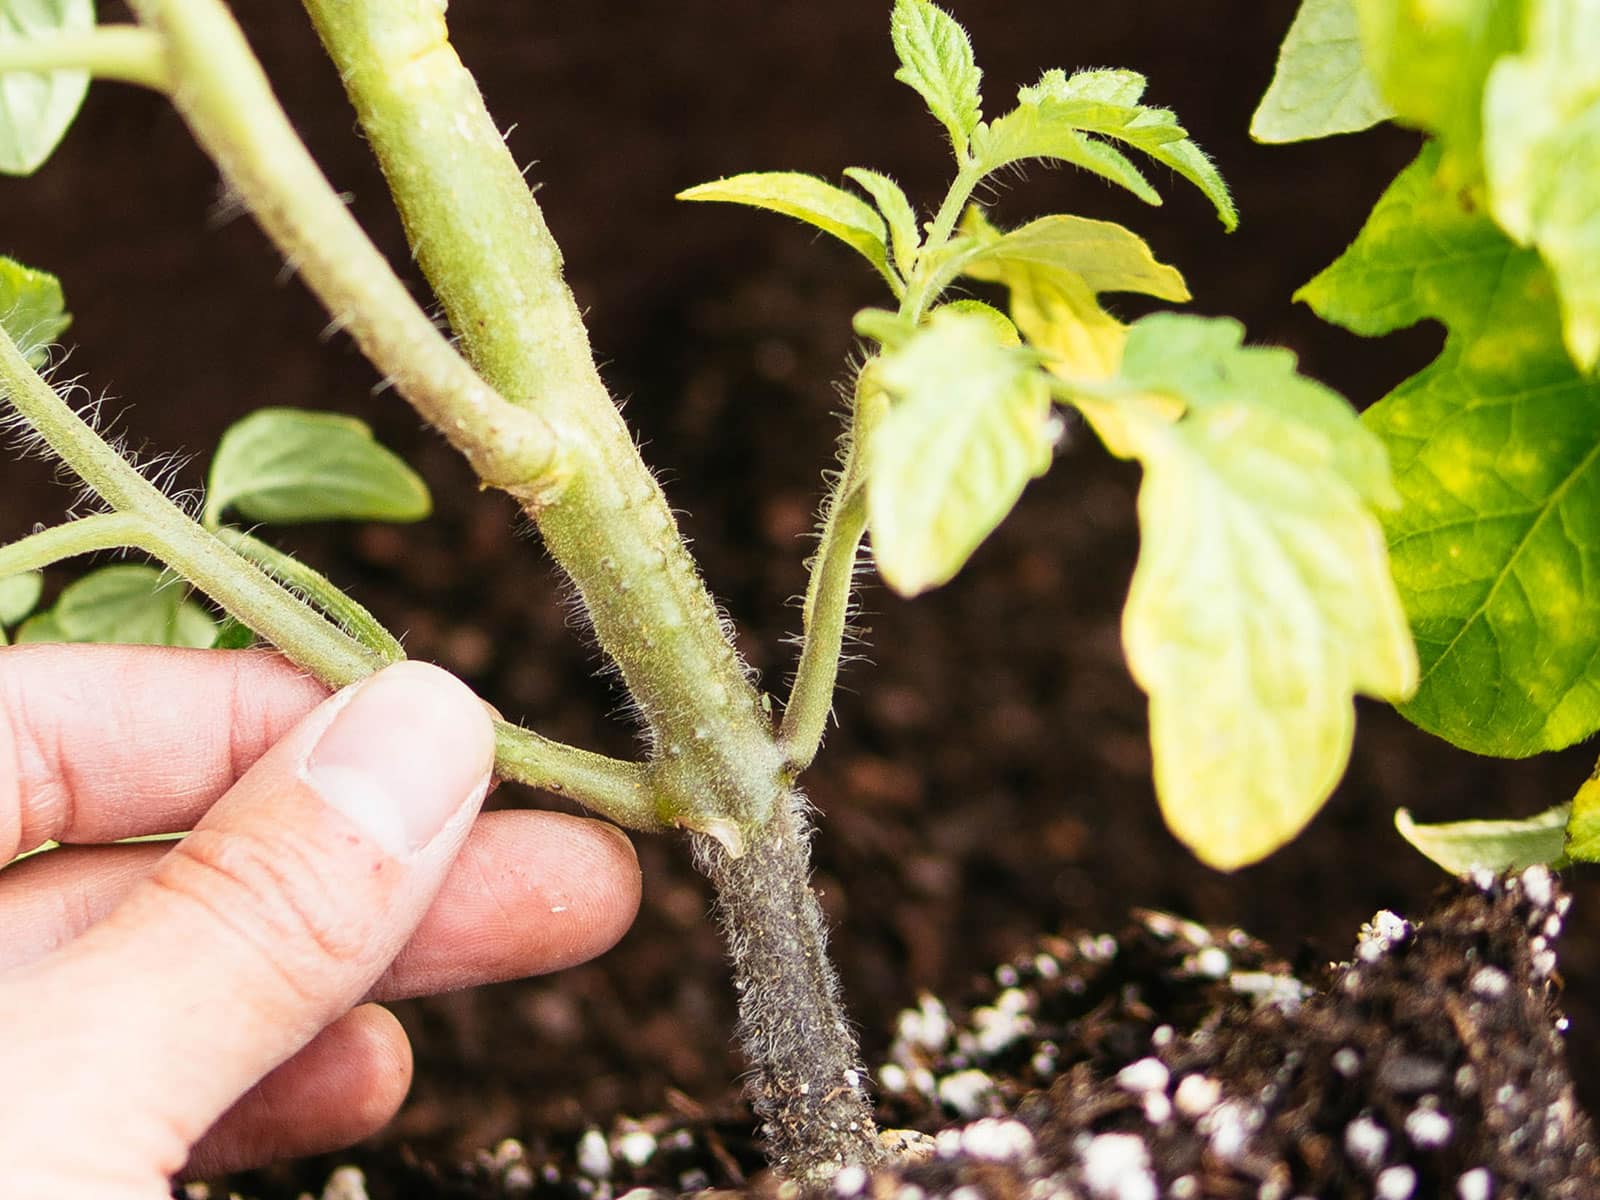 Woman's hand holding a tomato stem showing the first signs of adventitious roots forming as bumps